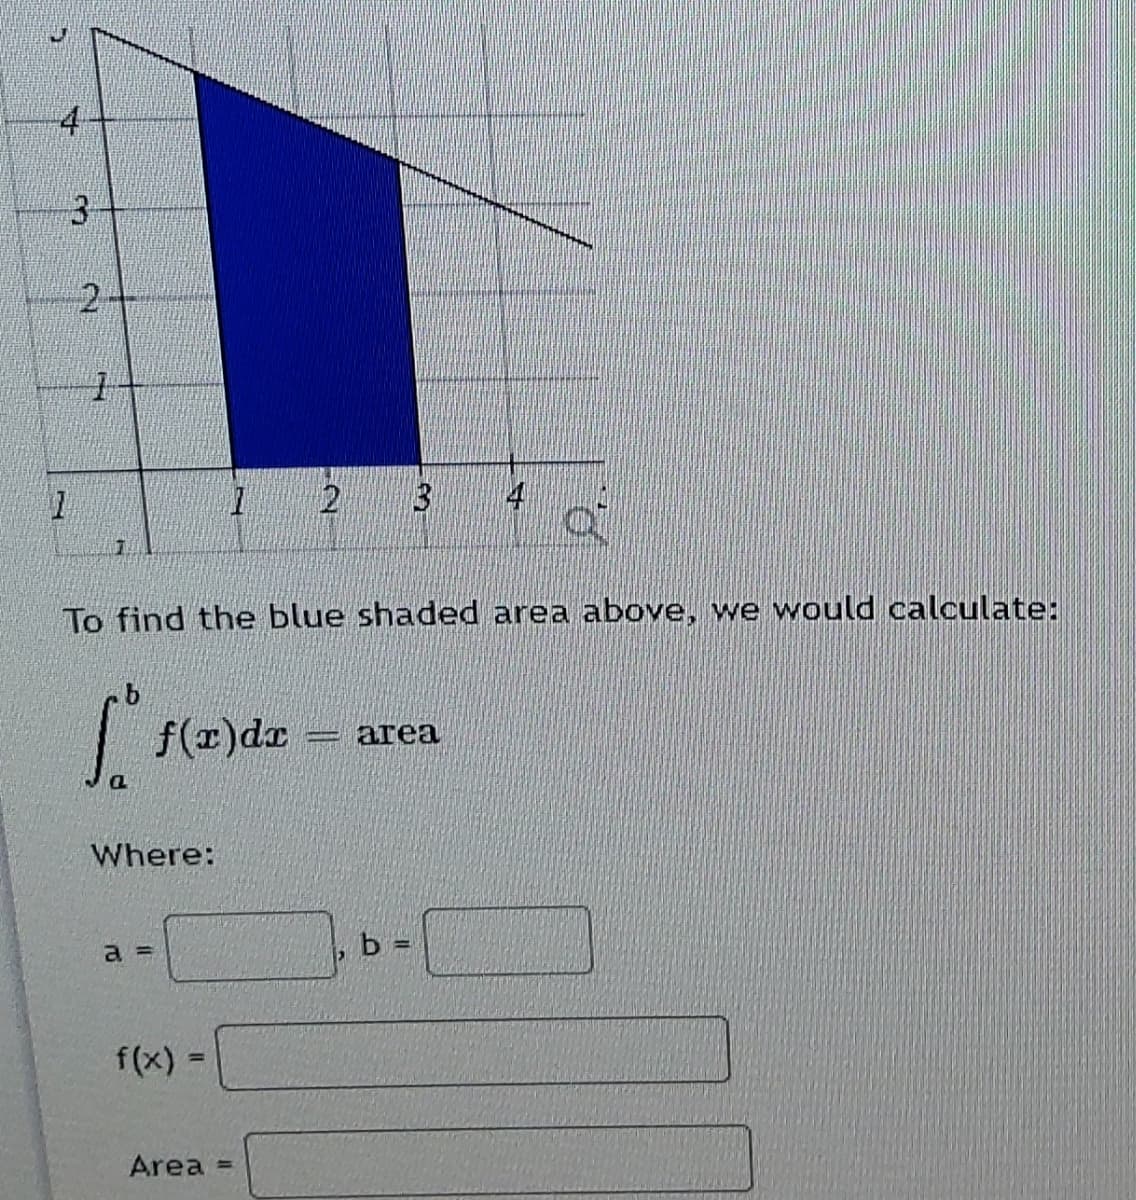 4
2.
3
4
To find the blue shaded area above, we would calculate:
f(r)dr = area
Where:
, b =
%3D
a =
f(x):
%3D
Area =
